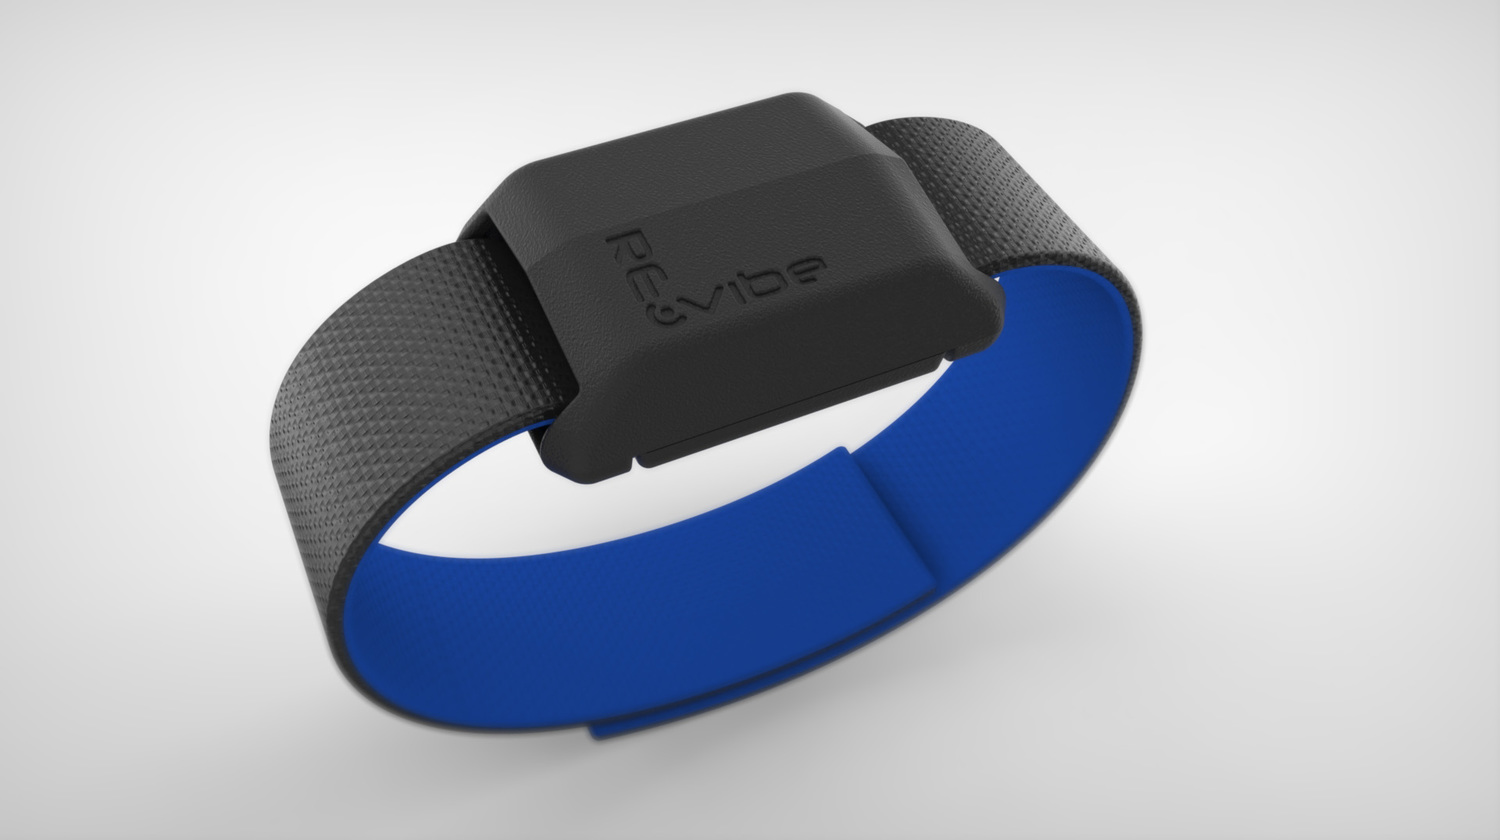 RE-Vibe is the wearable you have been looking all your life